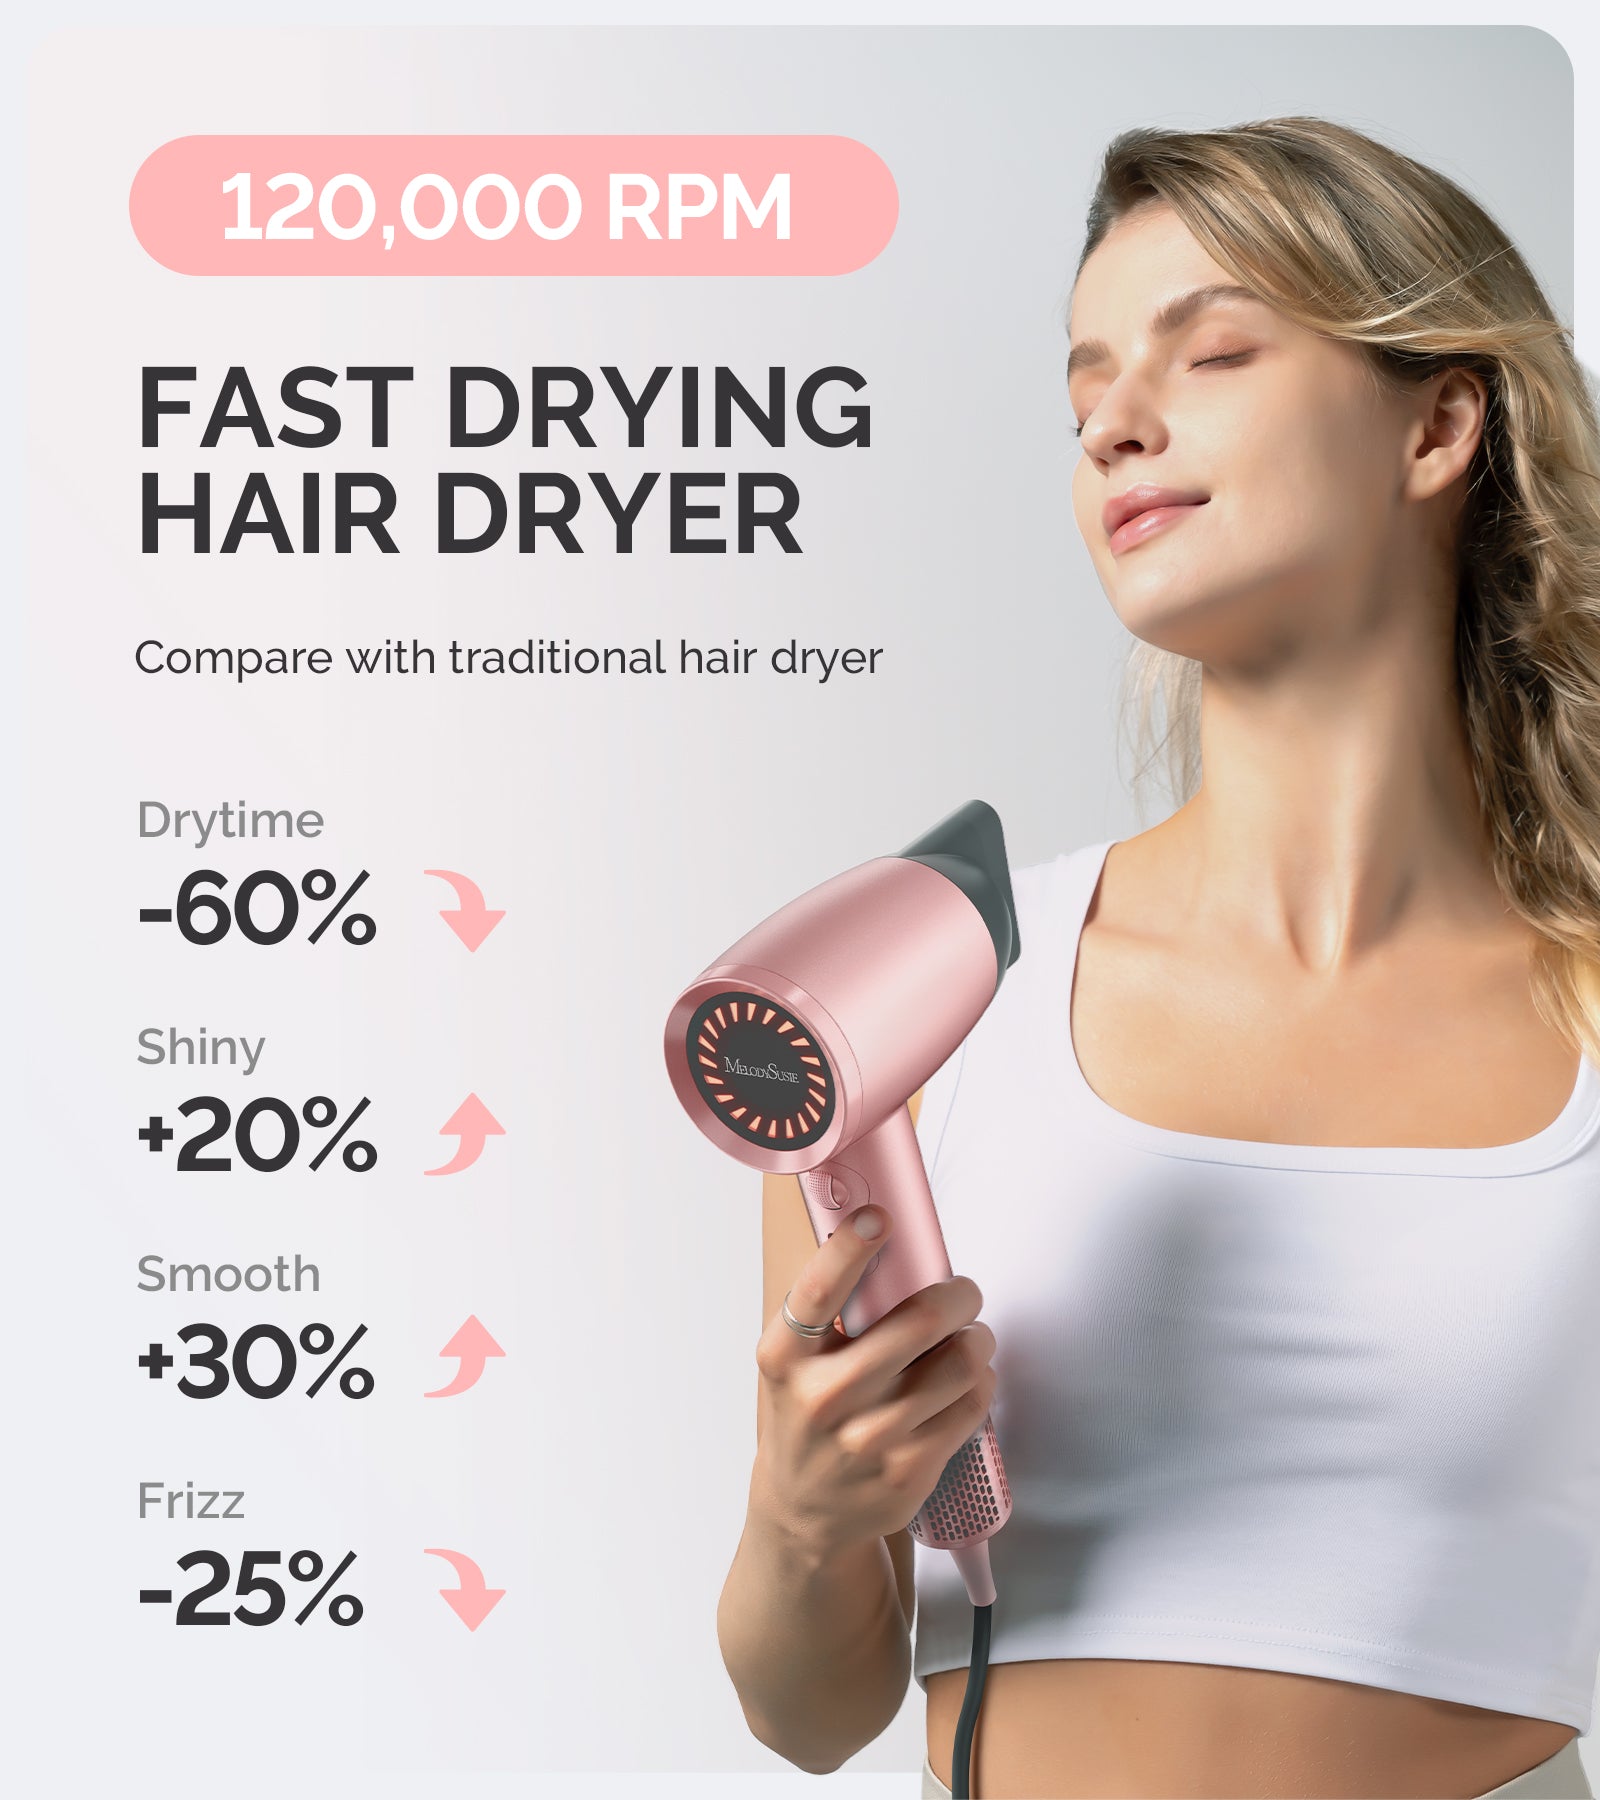 Professional Portable Ionic Hair Dryer 120,000 RPM - Pink (US ONLY)